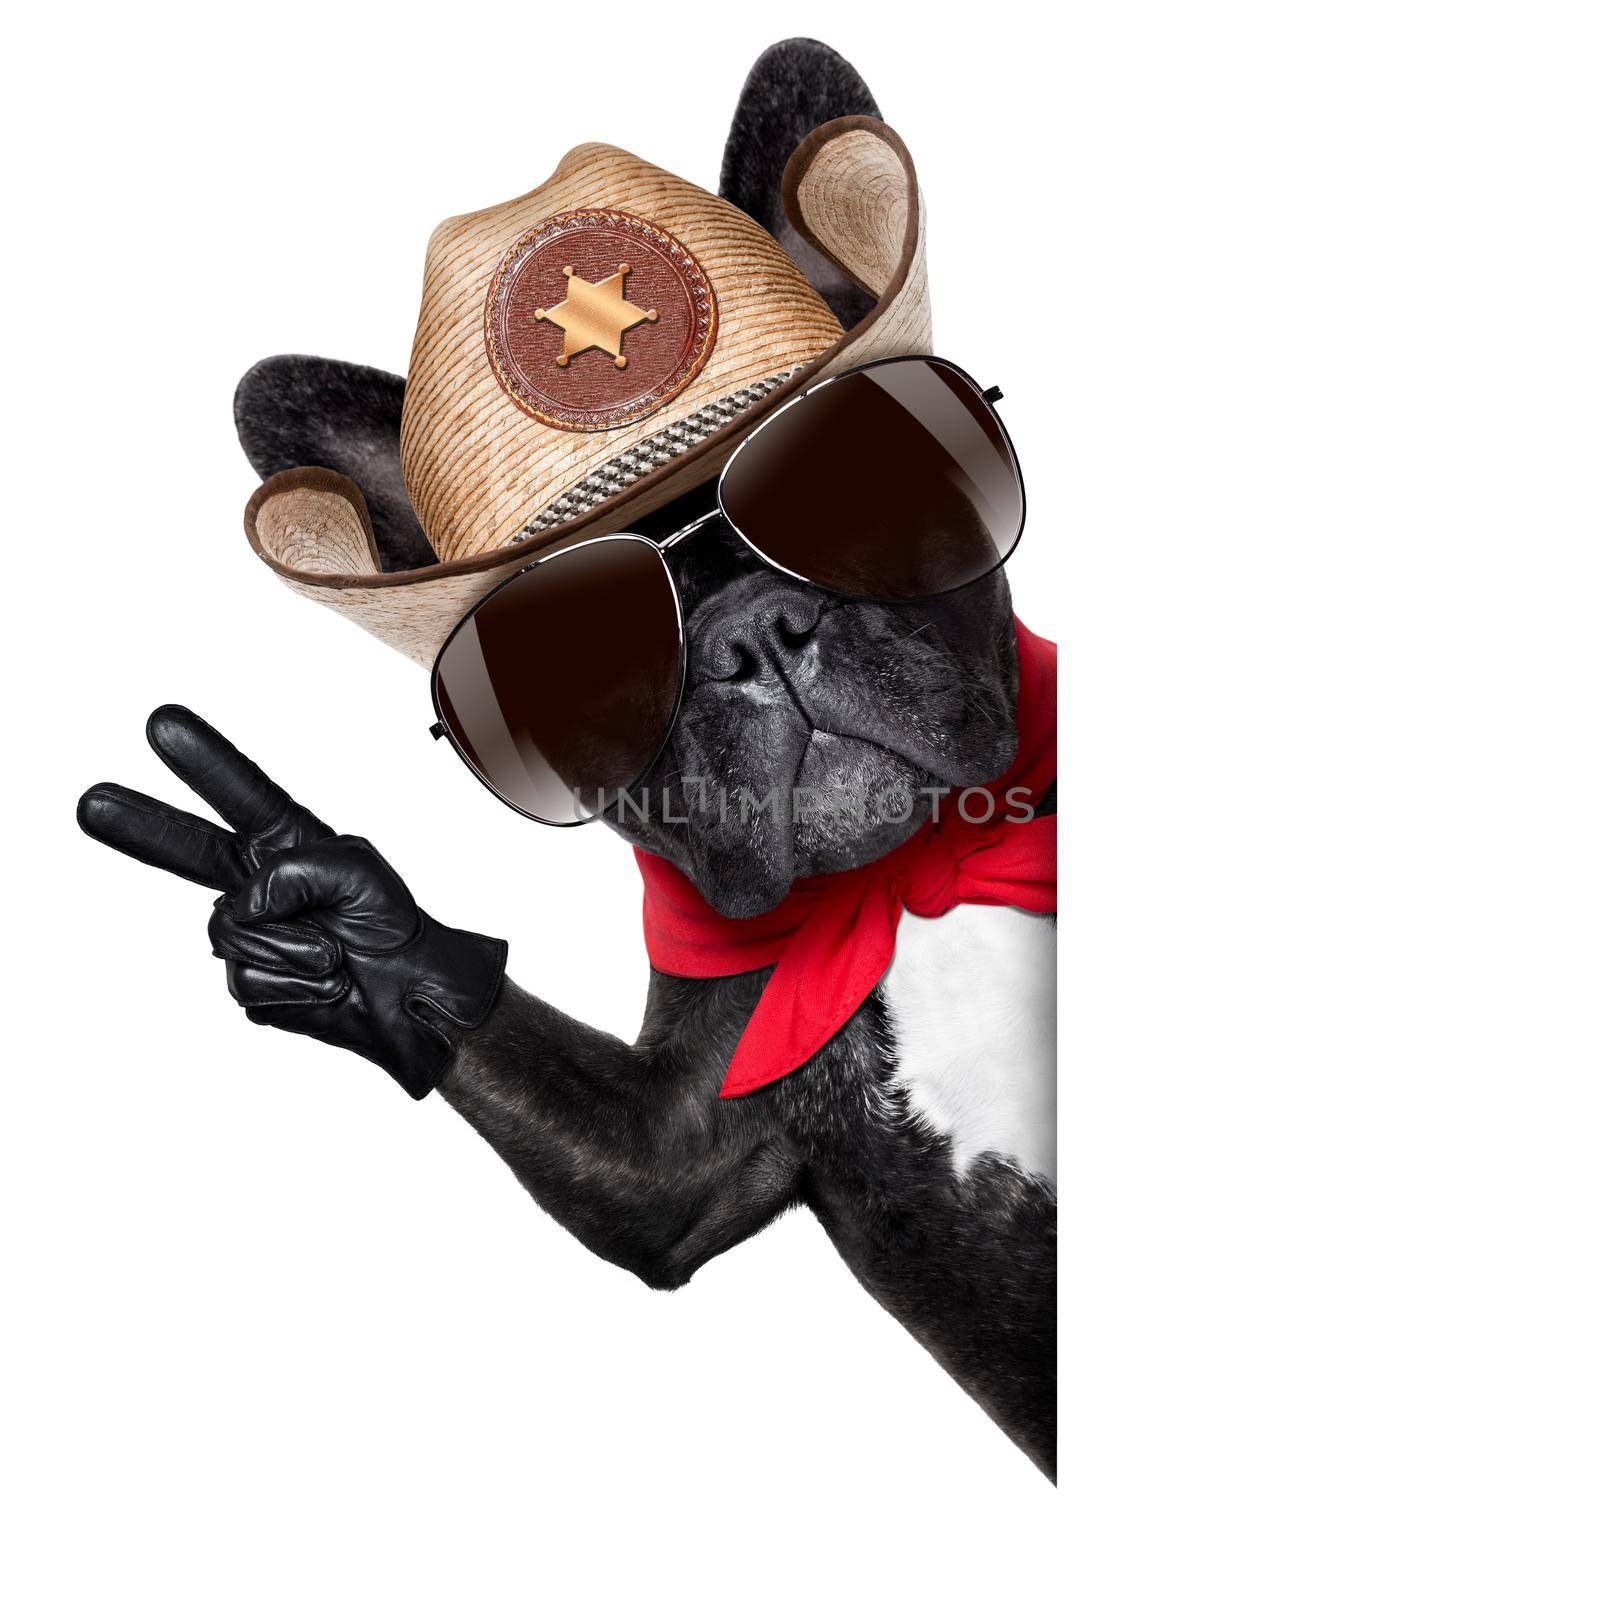 peace or victory fingers cowboy dog beside white blank banner oder placard